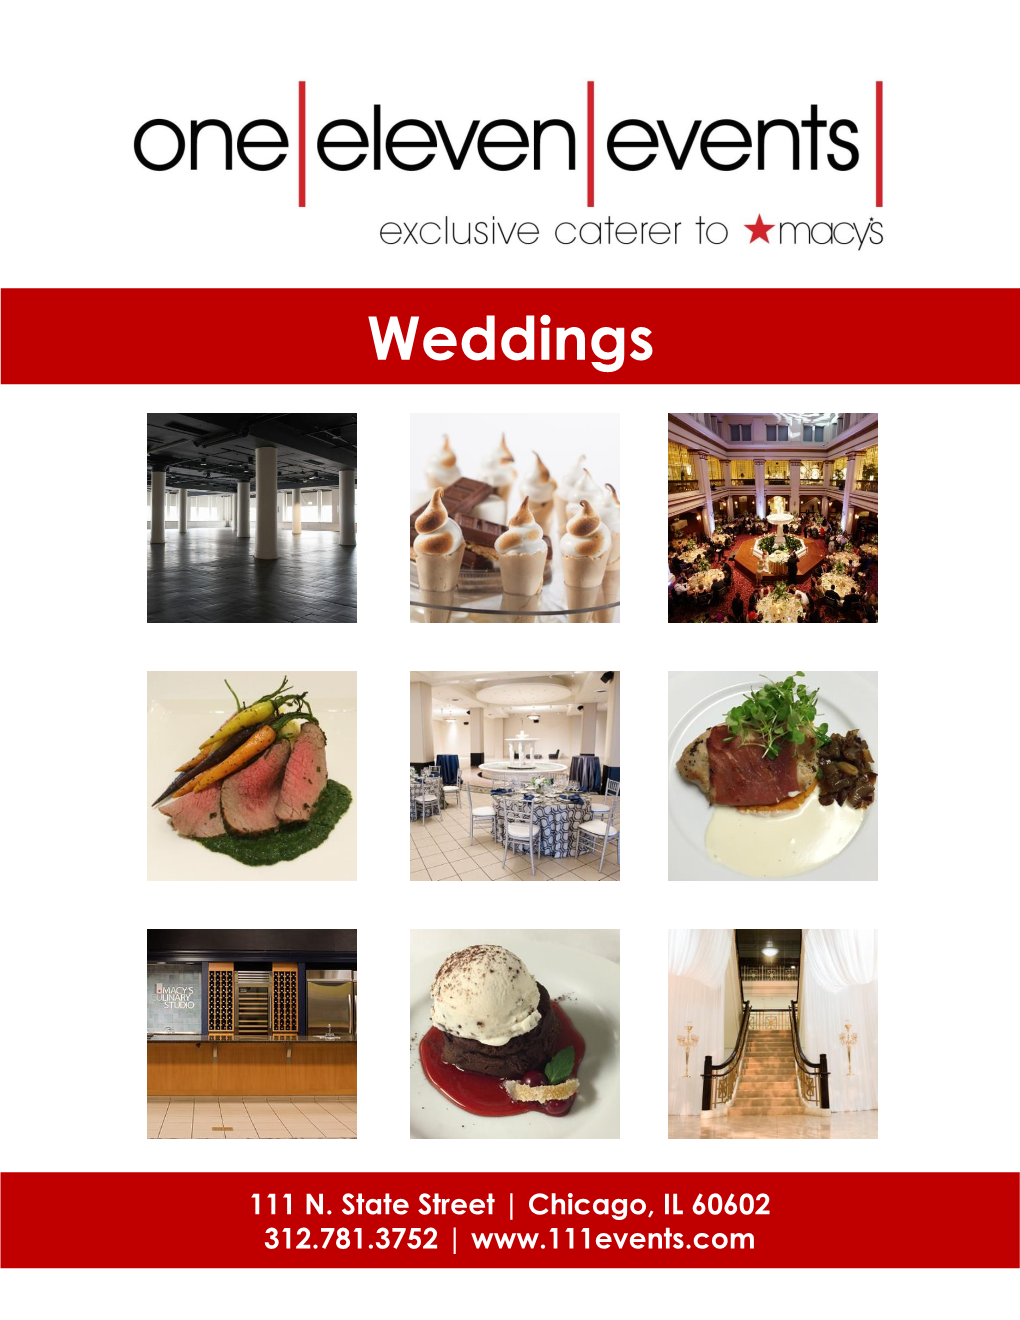 One Eleven Events Weddings